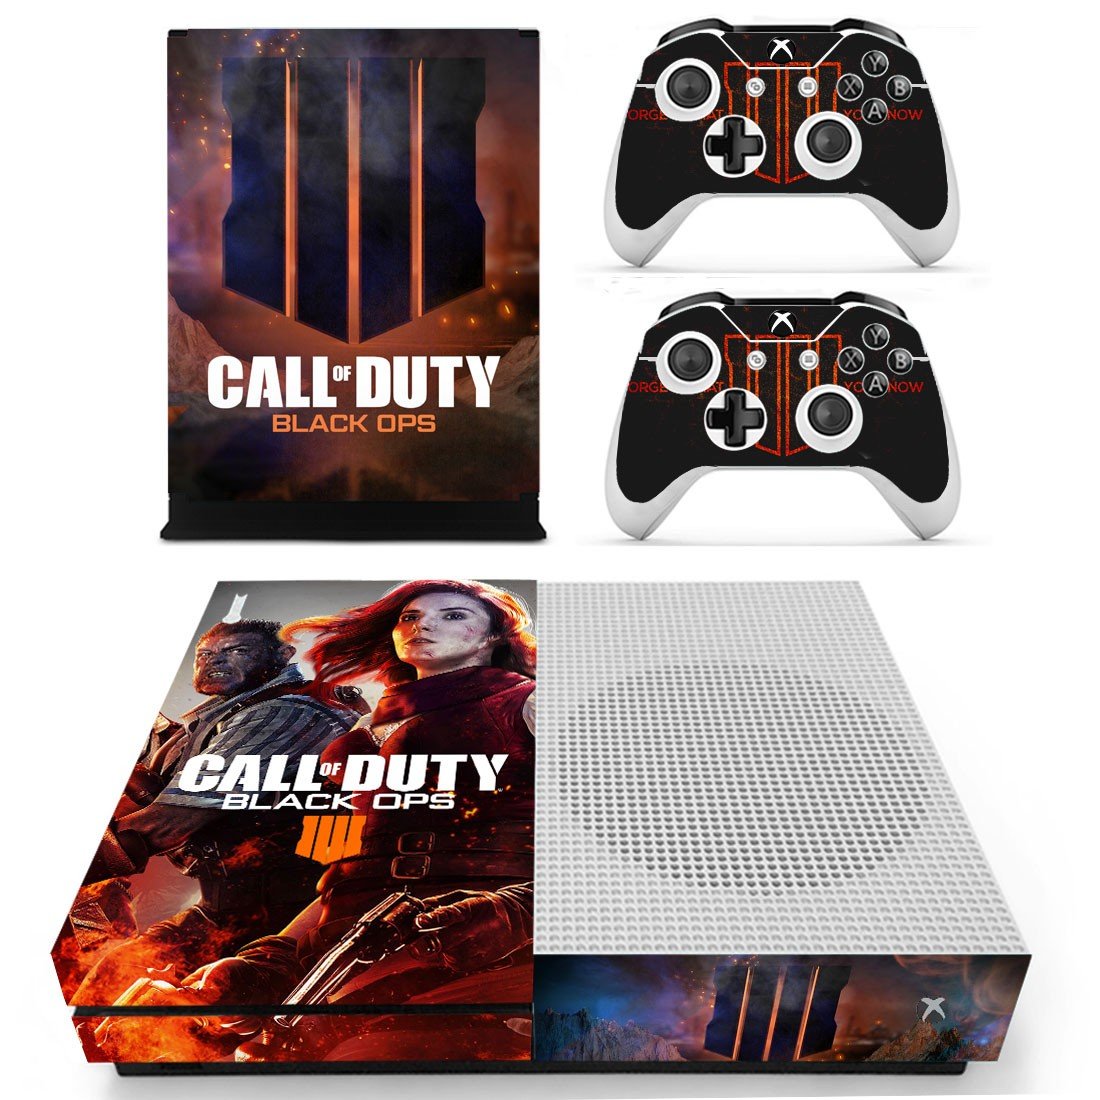 Xbox One S And Controllers Skin Cover Call Of Duty Black Ops 4